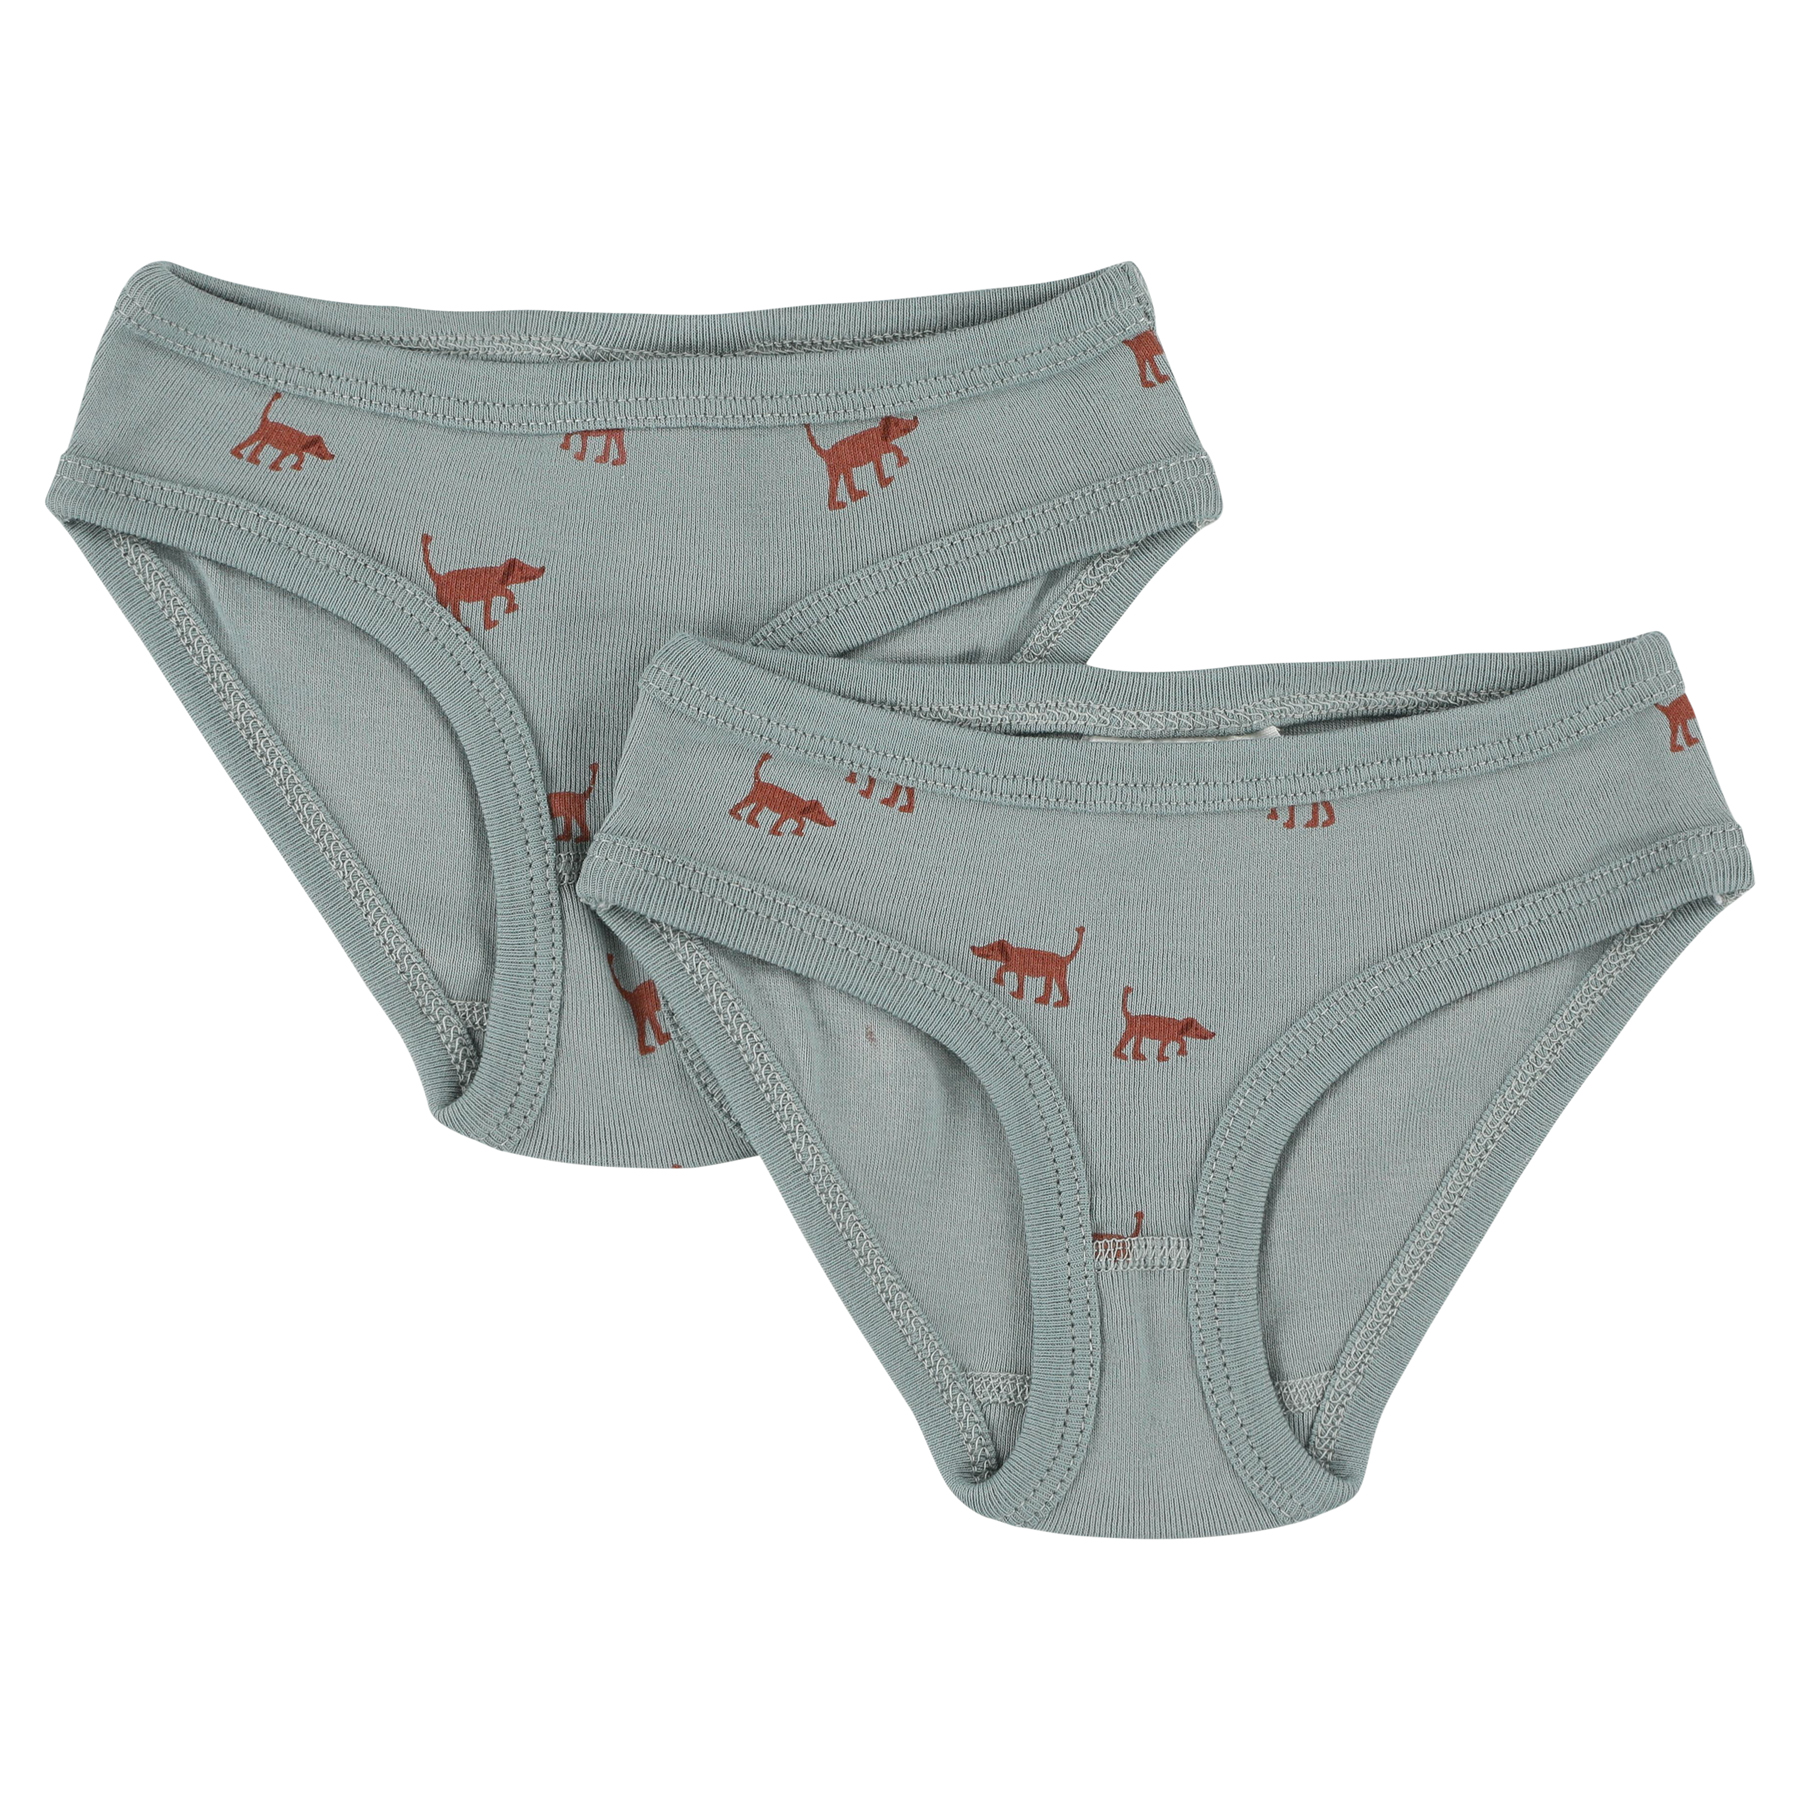 Culottes 2-pack - Playful Pup